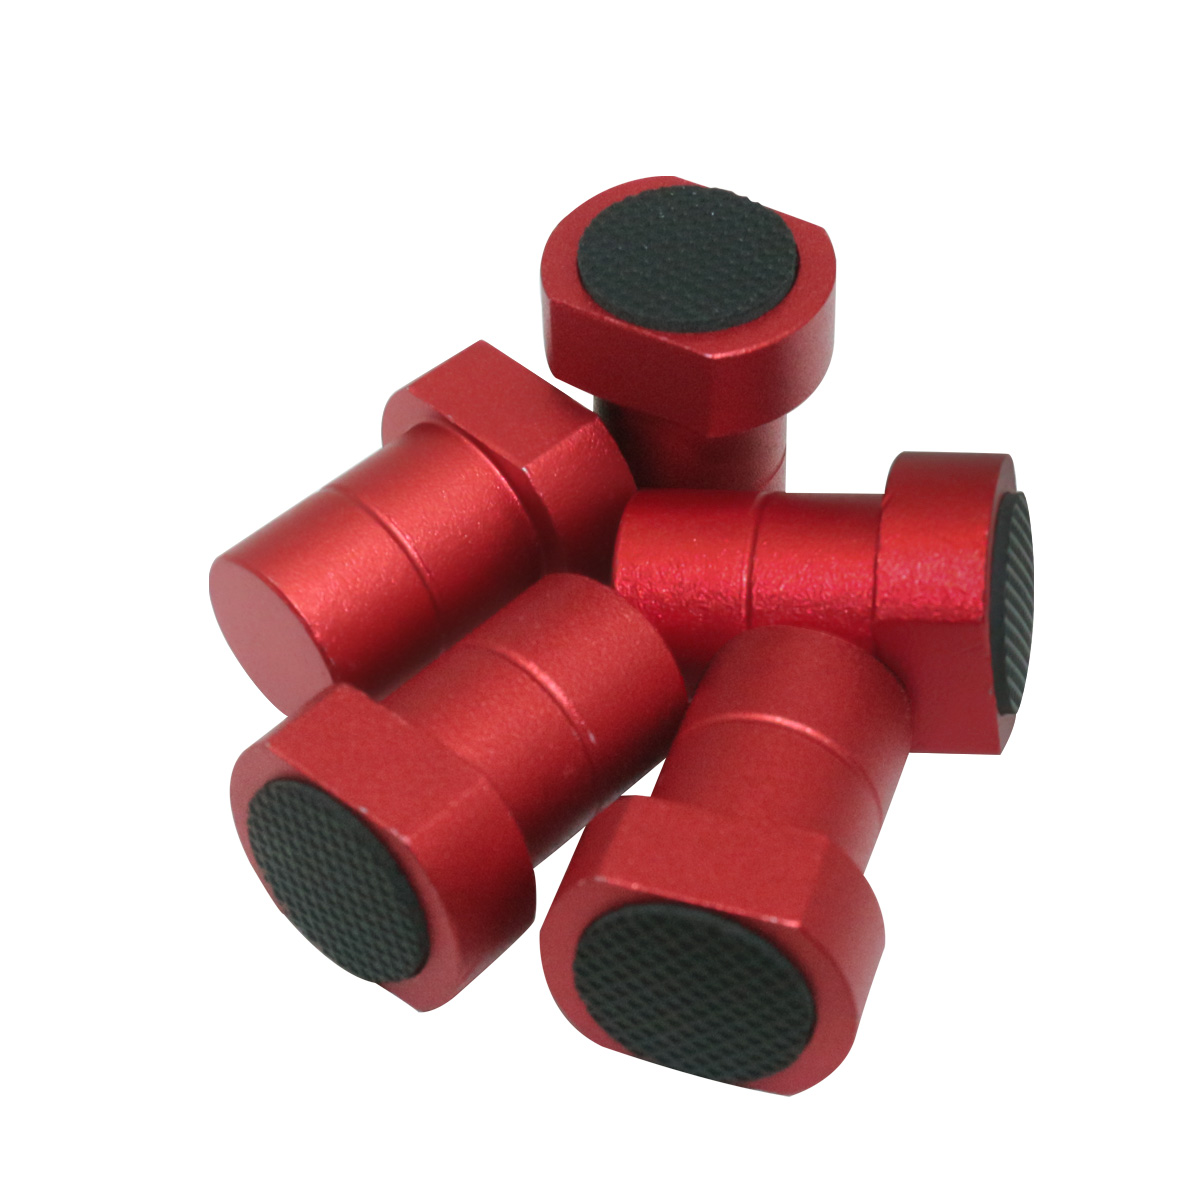 19/20mm Woodworking Bench Dogs Aluminum Alloy Red Anti-Slip Quick Release for T-Track Planing and Positioning Plug